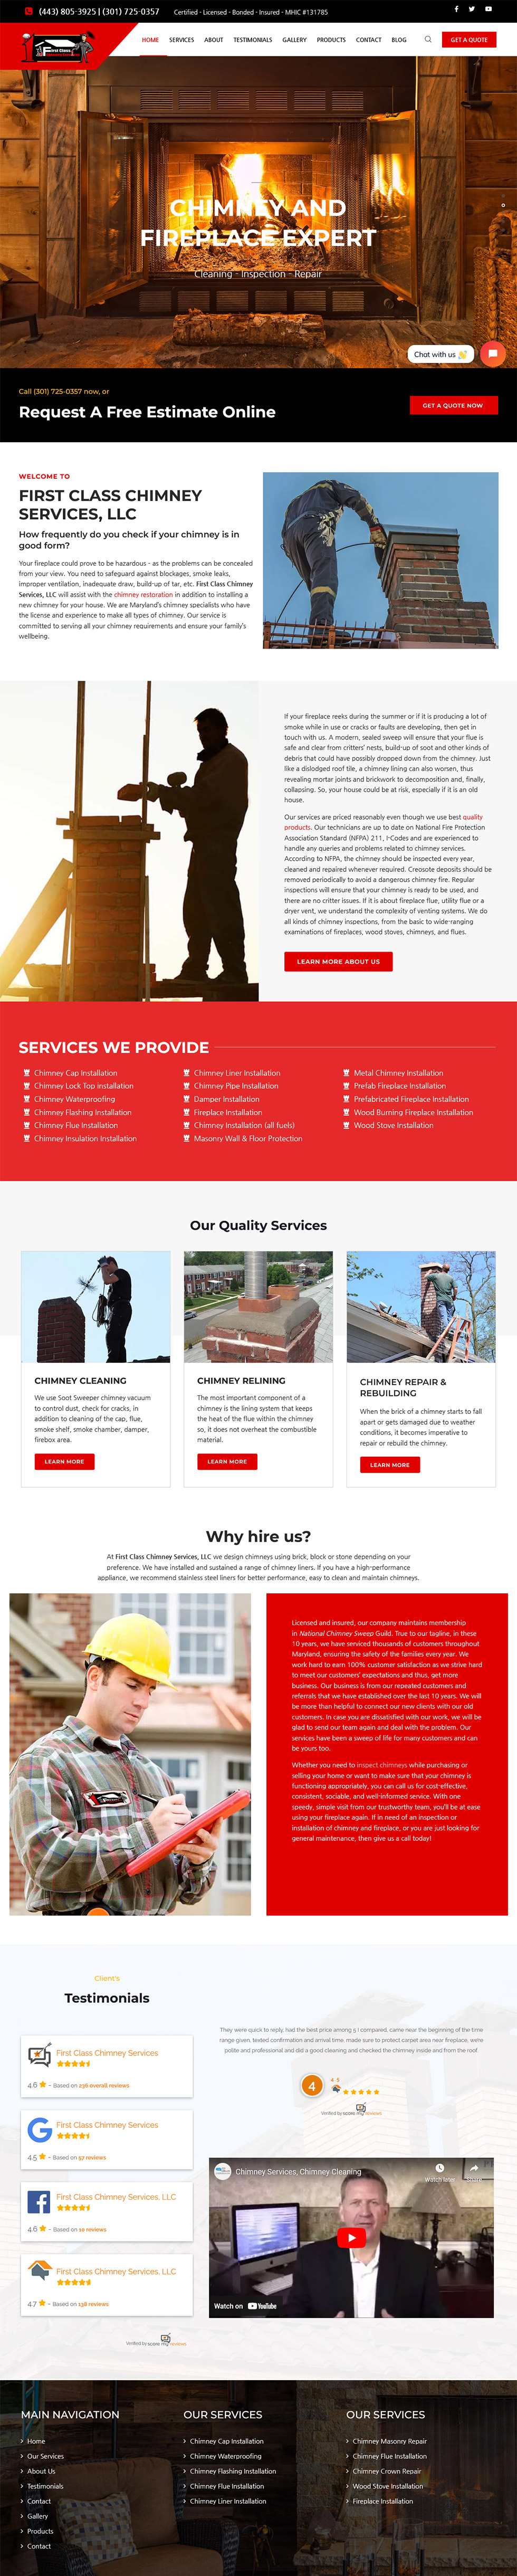 Chimney Cleaning Web Design Services